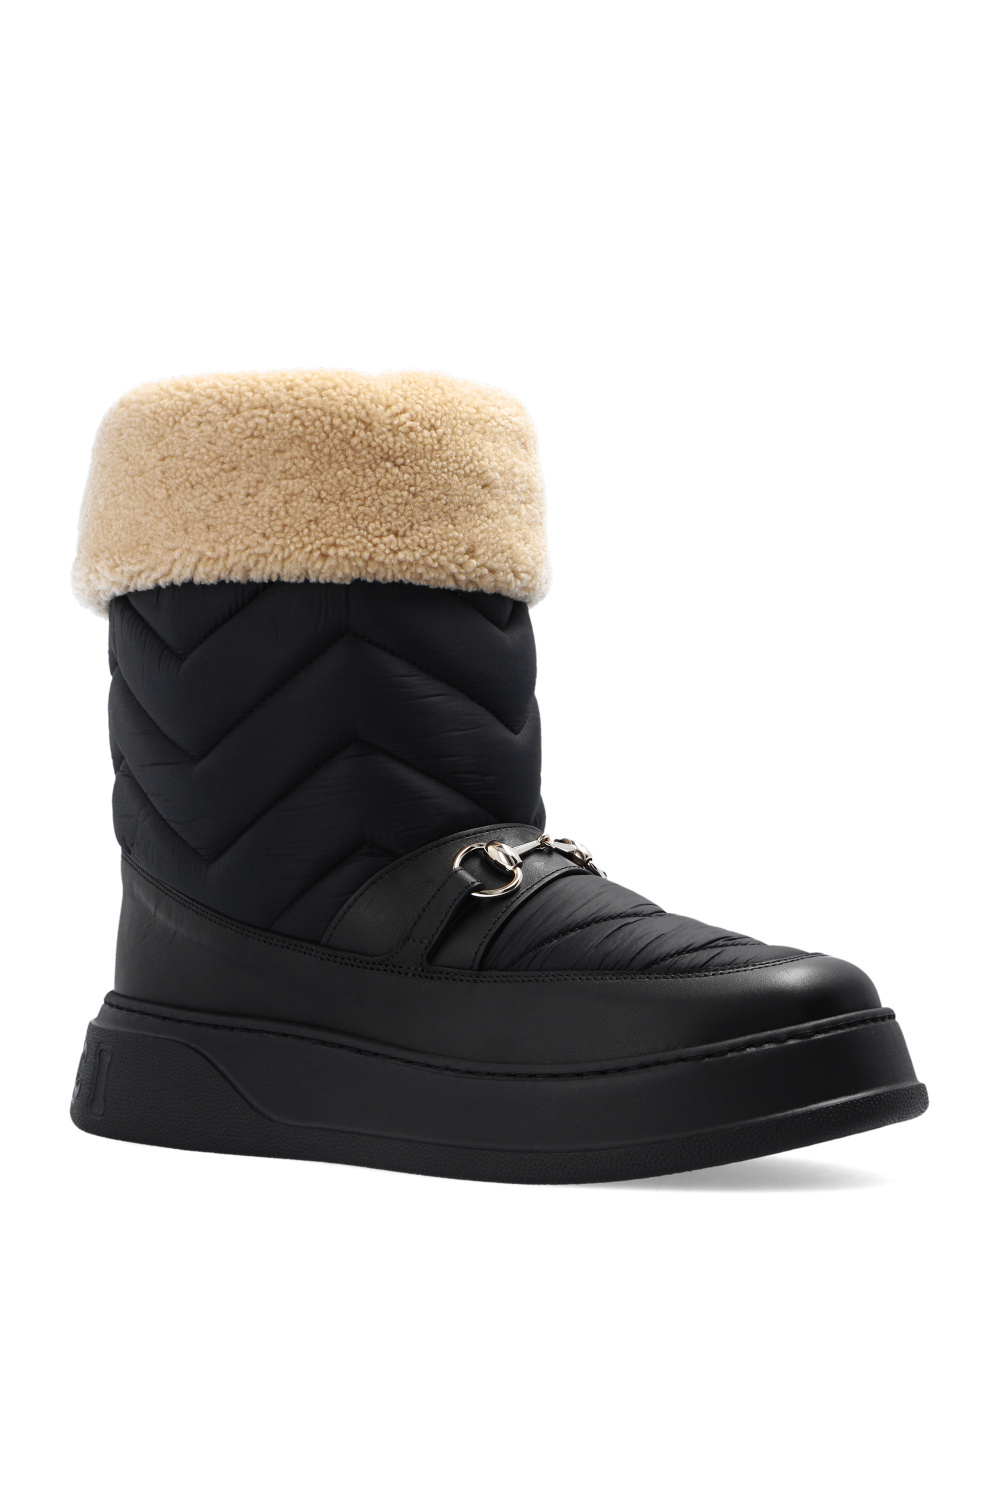 gucci ladies Quilted snow boots